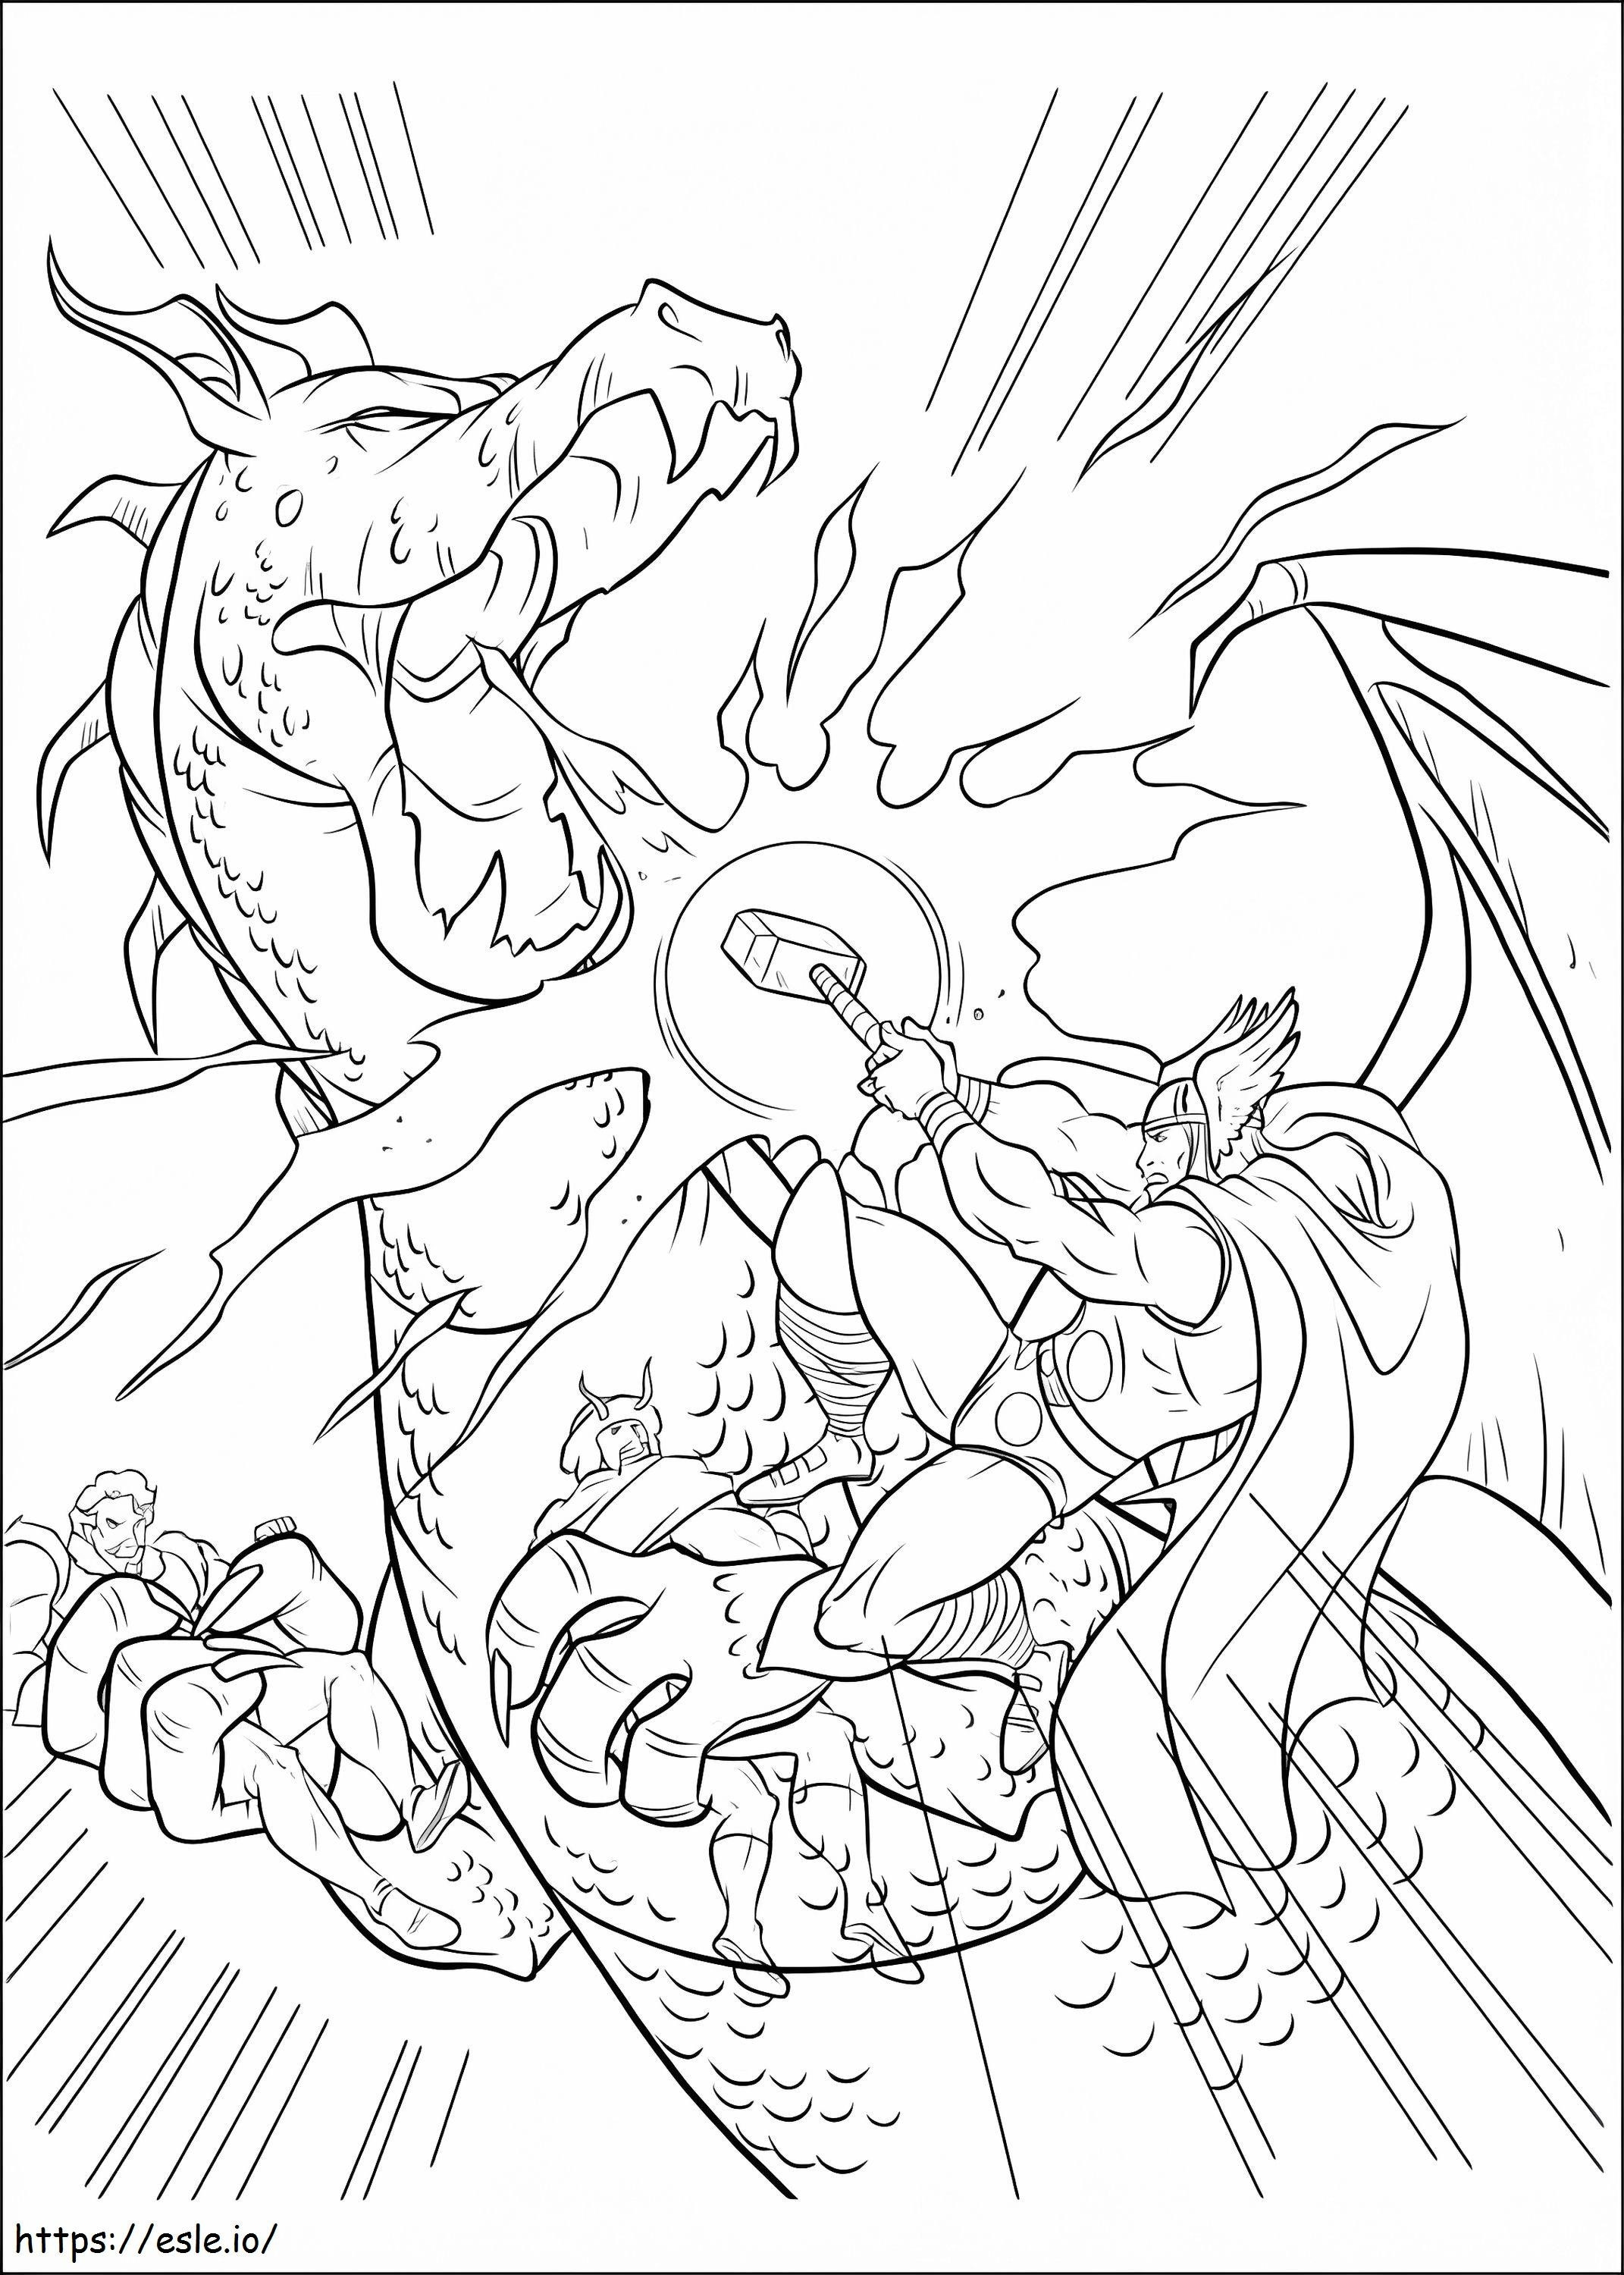 Thor Fights Dragon coloring page